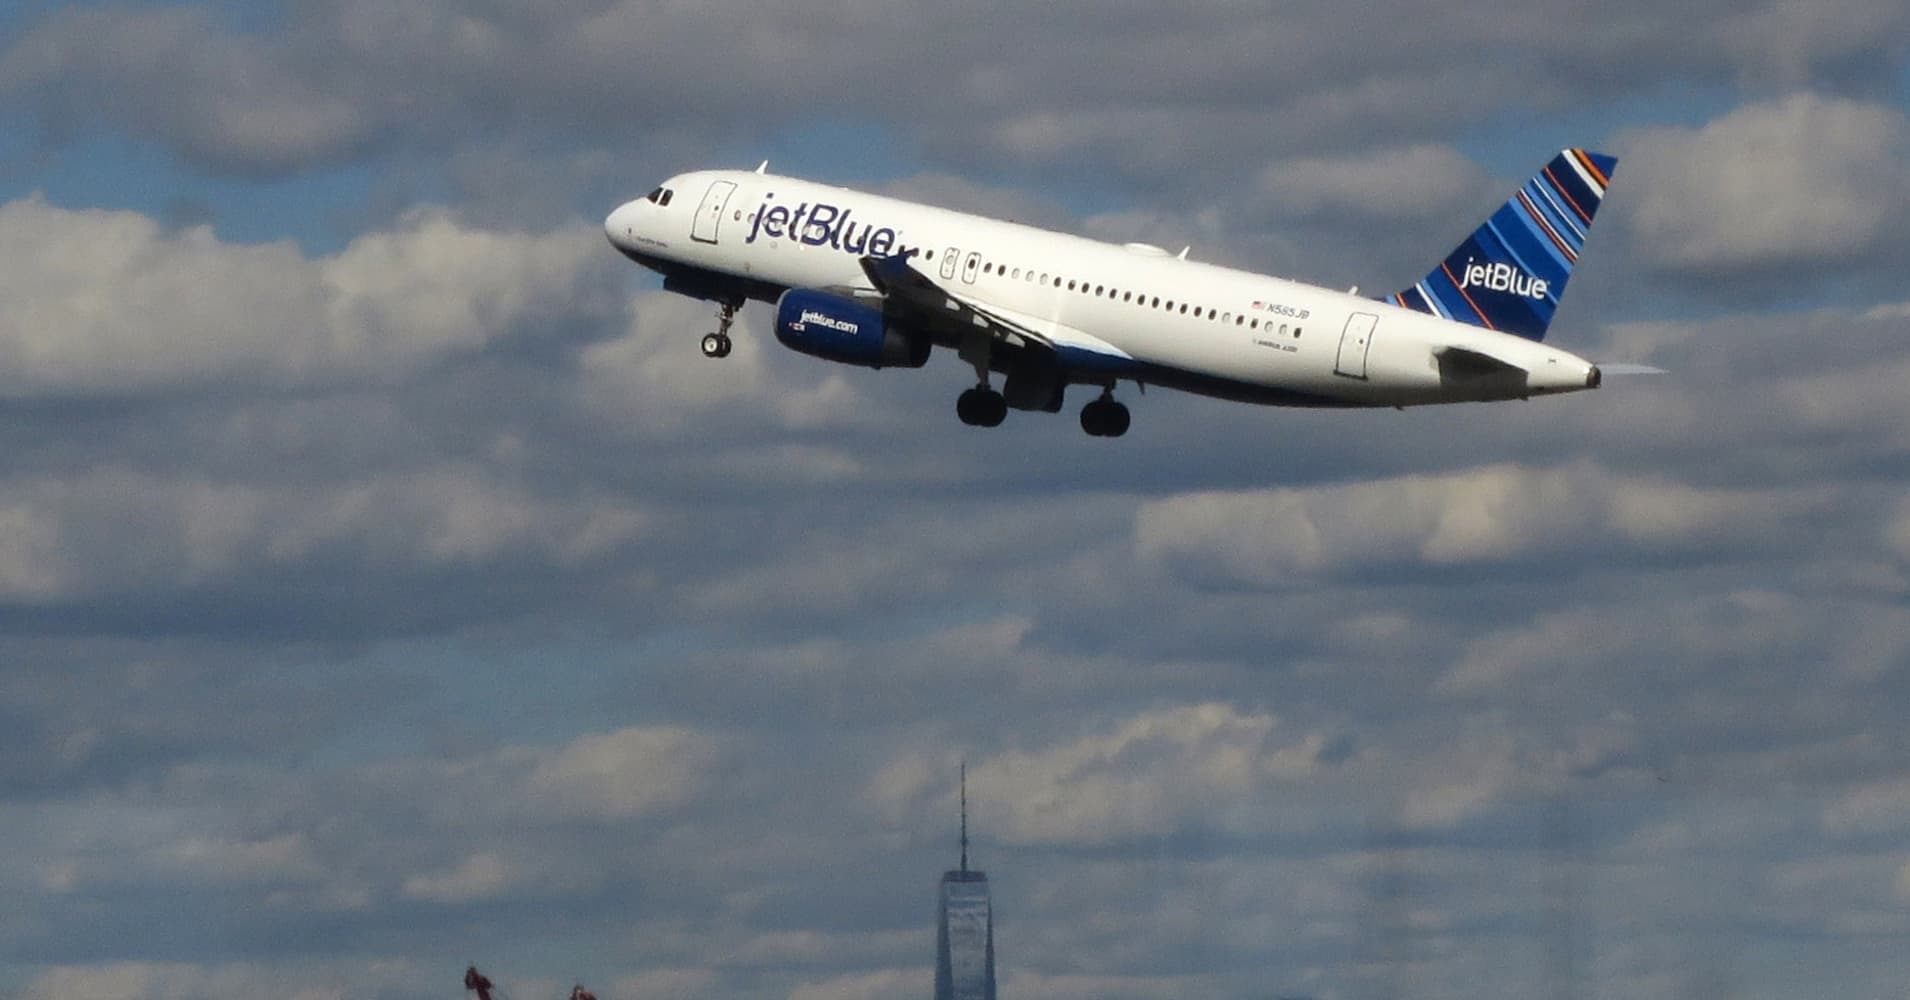 A jetBlue airplane flies over New York's Lower Manhattan as it takes off from Newark Liberty International Airport in Newark, New Jersey.